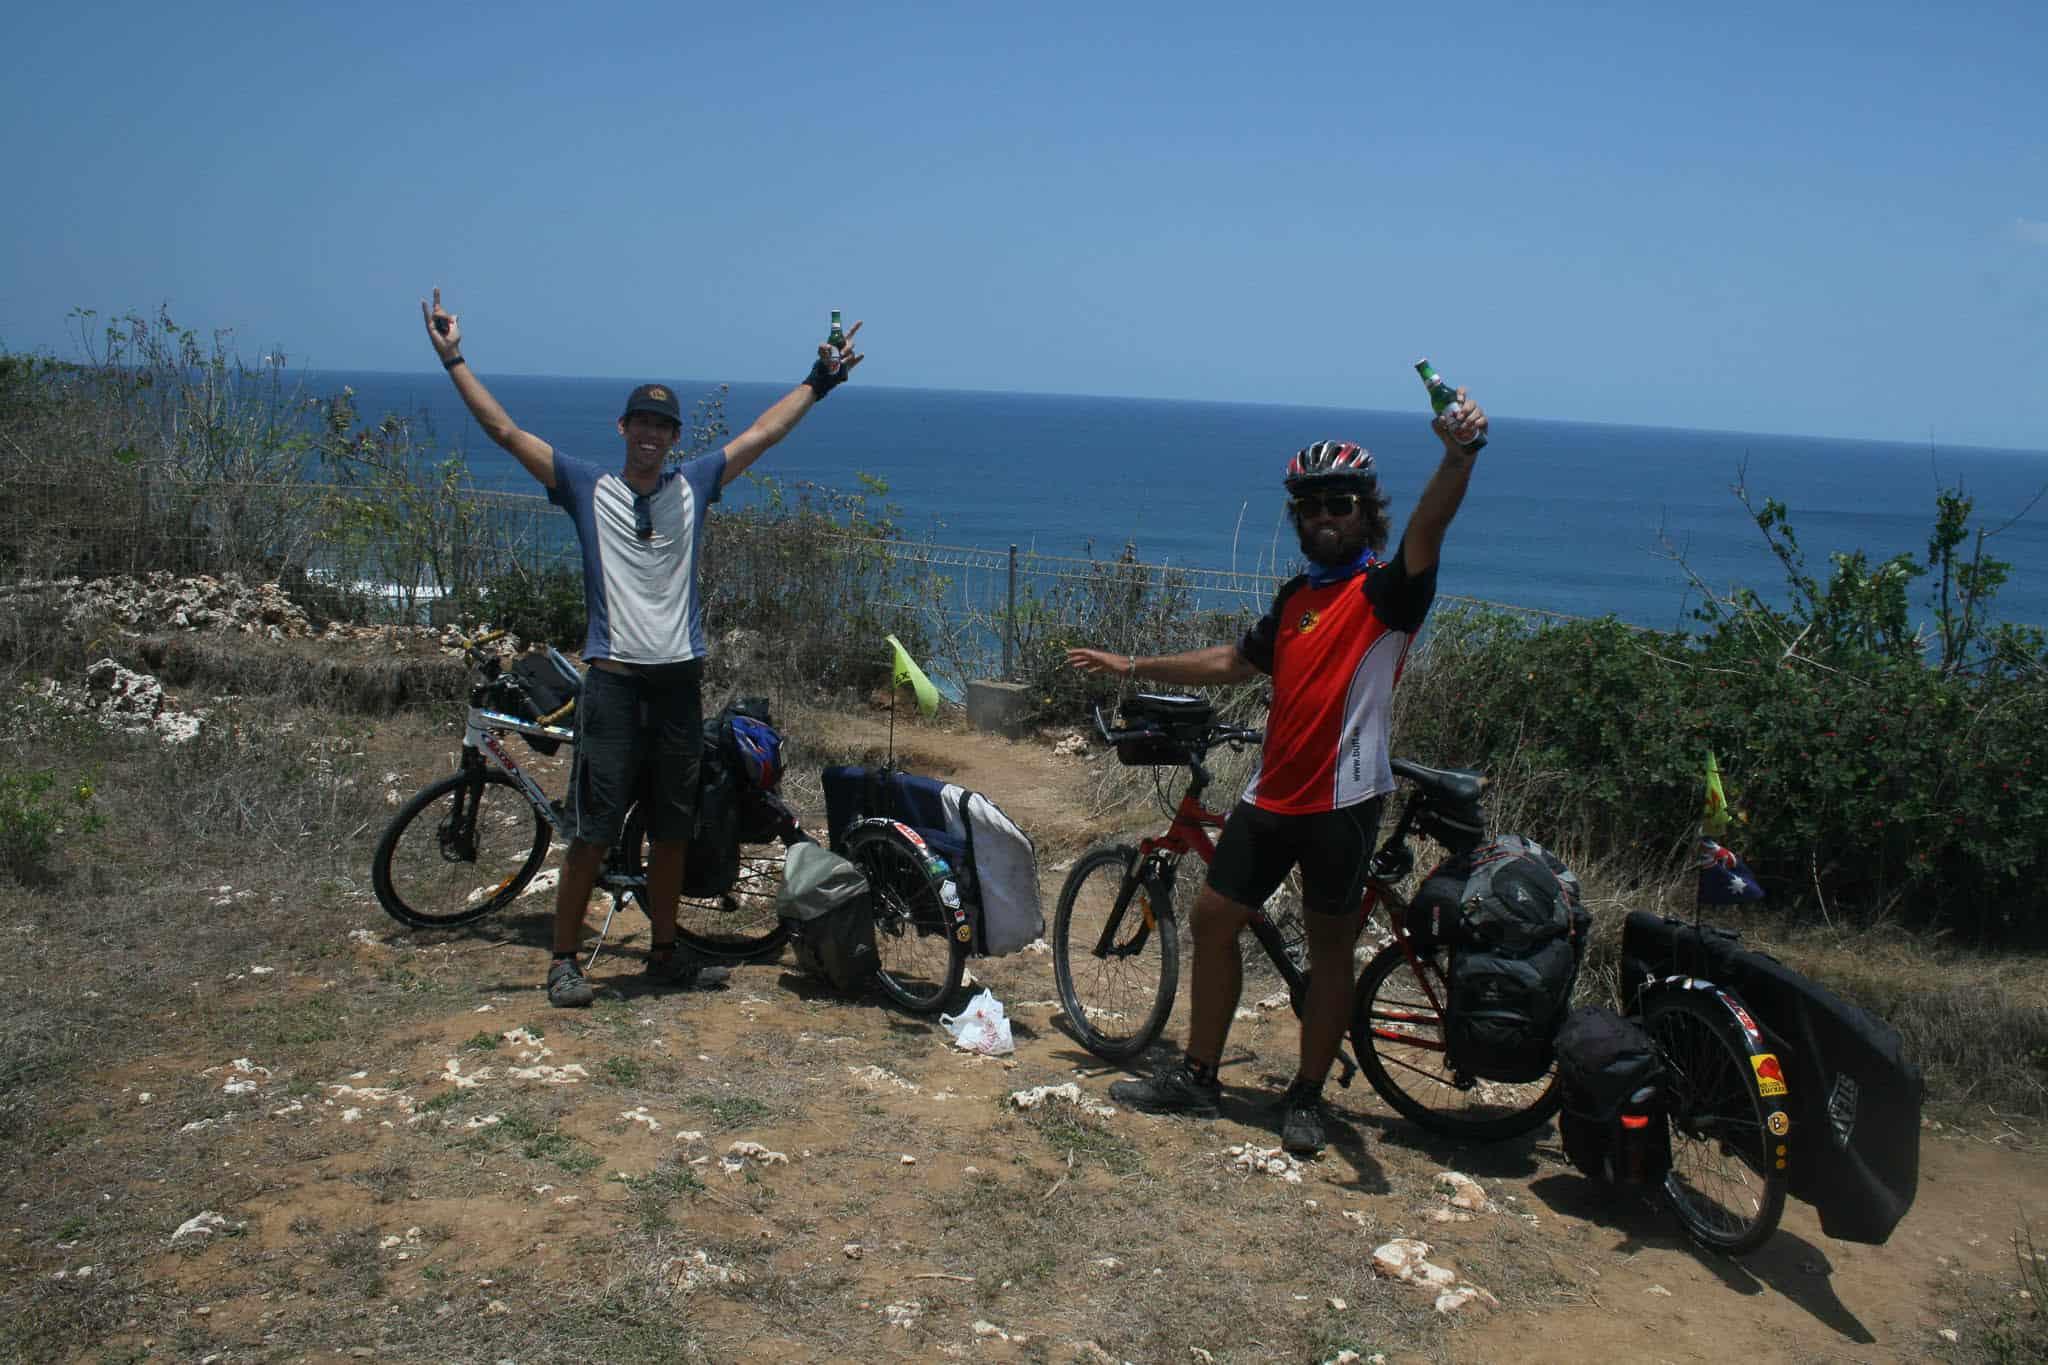 The horizontal photo shows Rian and Dylan standing with their bicycles on the cliff of Uluwatu, Bali, Indonesia. They have cycled Indonesia from North to South and are celebrating their successful journey. Dylan is holding both arms up as a victory sign. Rian has got one arm up. He is holding a beer. Rian is wearing the Australia Flag Original Buff® as neck cooler. It appears mid day with hardly any shadow and a clear blue sky. It must be hot. Source: Eatsleepsurf.com.au Copyright: Unknown. We received the images as "Thank You" for providing the Buff®